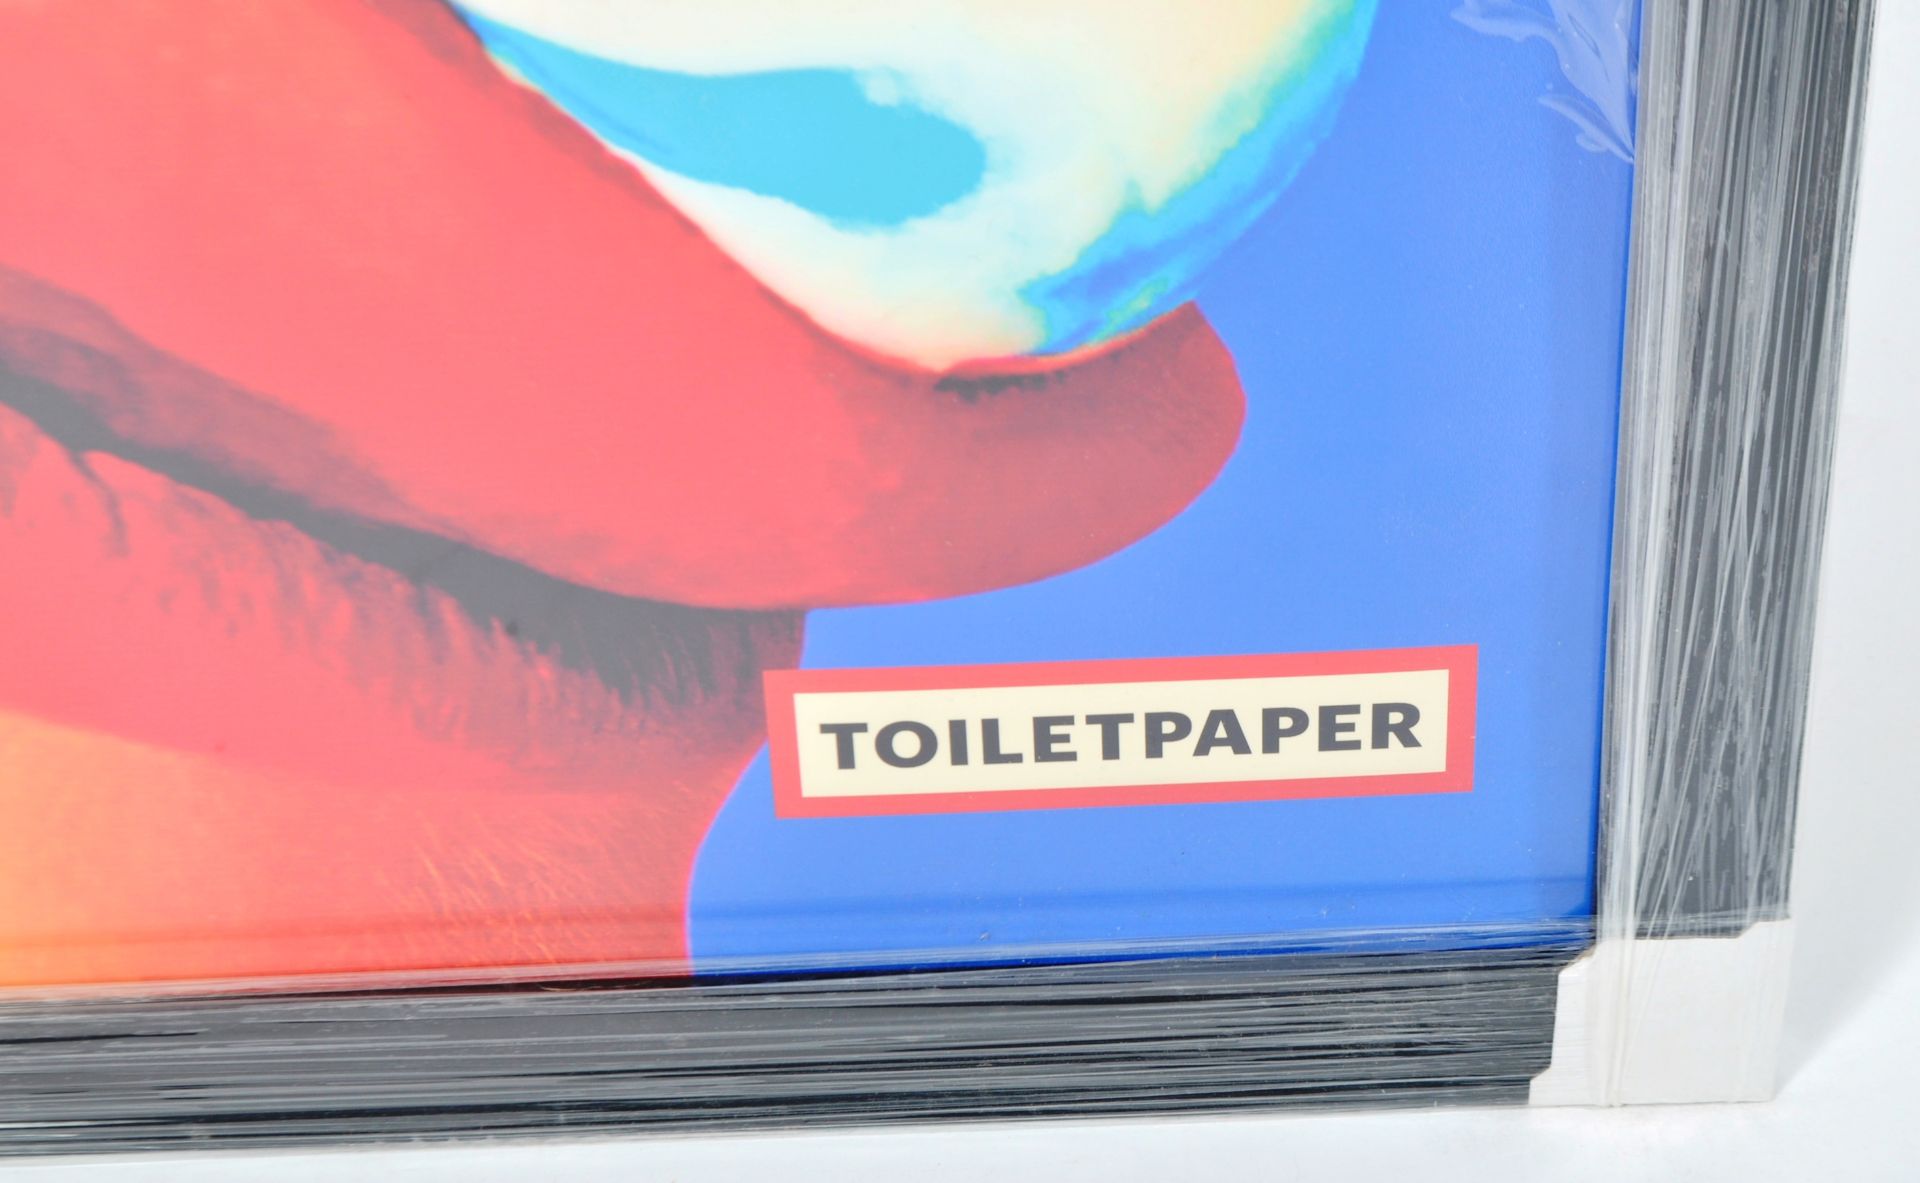 TOILETPAPER MAGAZINE - CONTEMPORARY FRAMED POSTER ISSUE NO.15 - Image 6 of 7